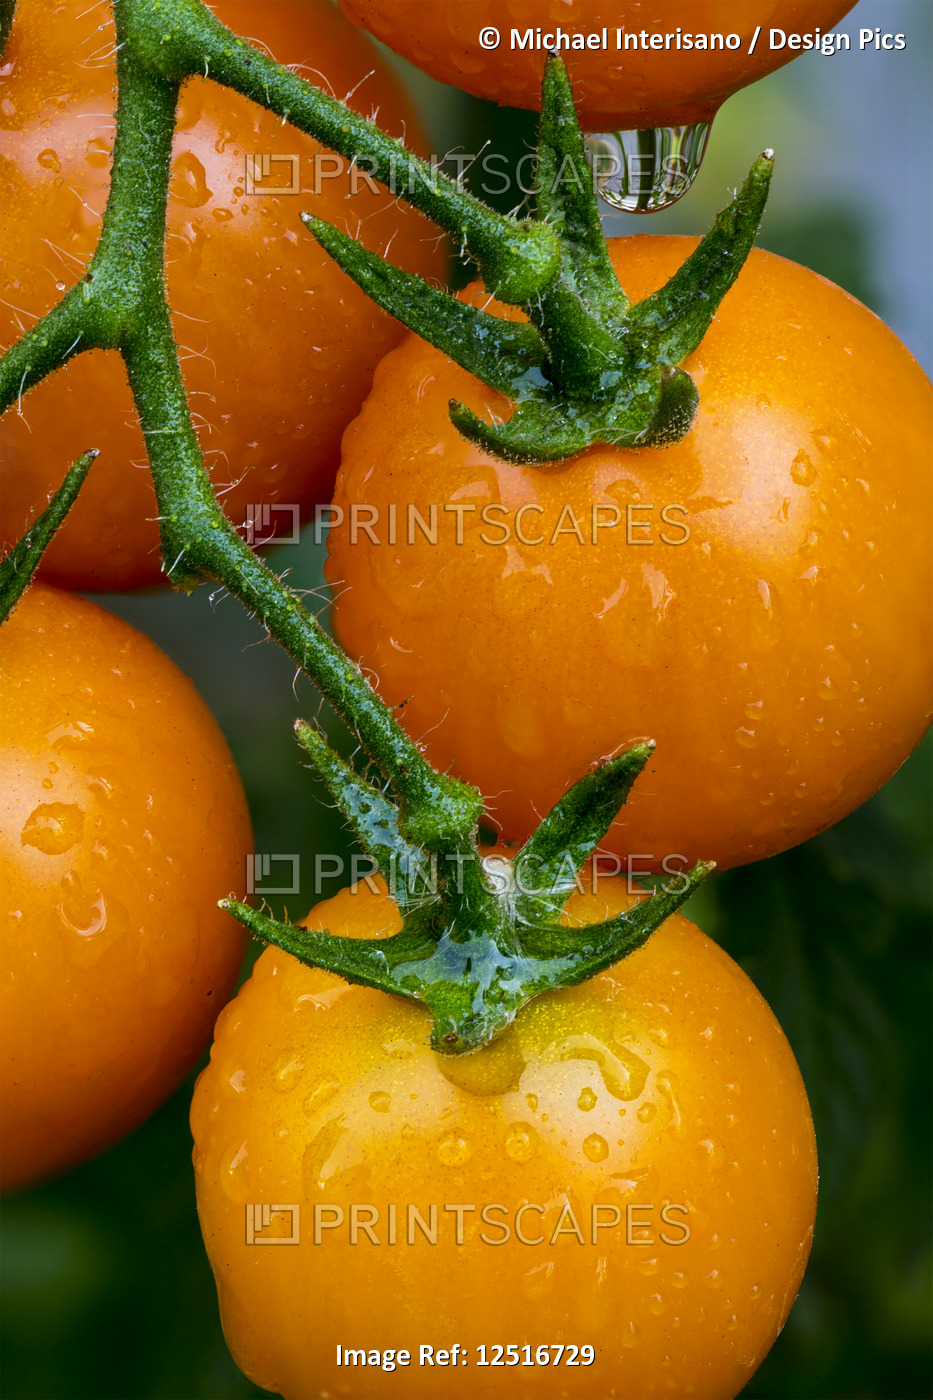 Tomatoes growing on a vine